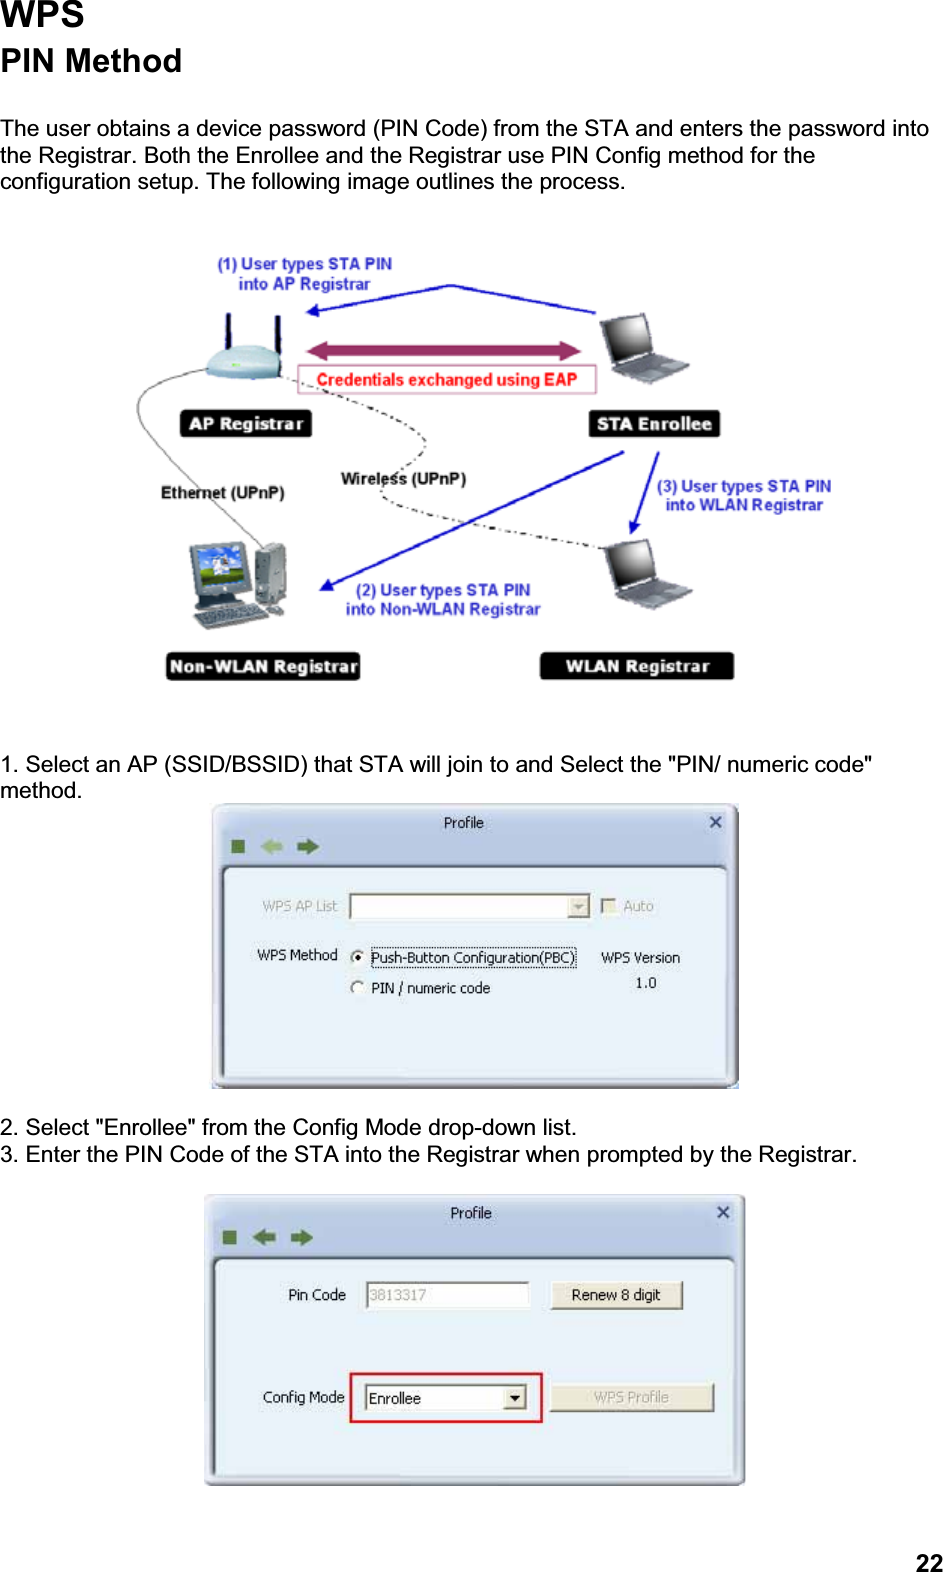 22WPSPIN Method The user obtains a device password (PIN Code) from the STA and enters the password into the Registrar. Both the Enrollee and the Registrar use PIN Config method for the configuration setup. The following image outlines the process.1. Select an AP (SSID/BSSID) that STA will join to and Select the &quot;PIN/ numeric code&quot; method.2. Select &quot;Enrollee&quot; from the Config Mode drop-down list.3. Enter the PIN Code of the STA into the Registrar when prompted by the Registrar.